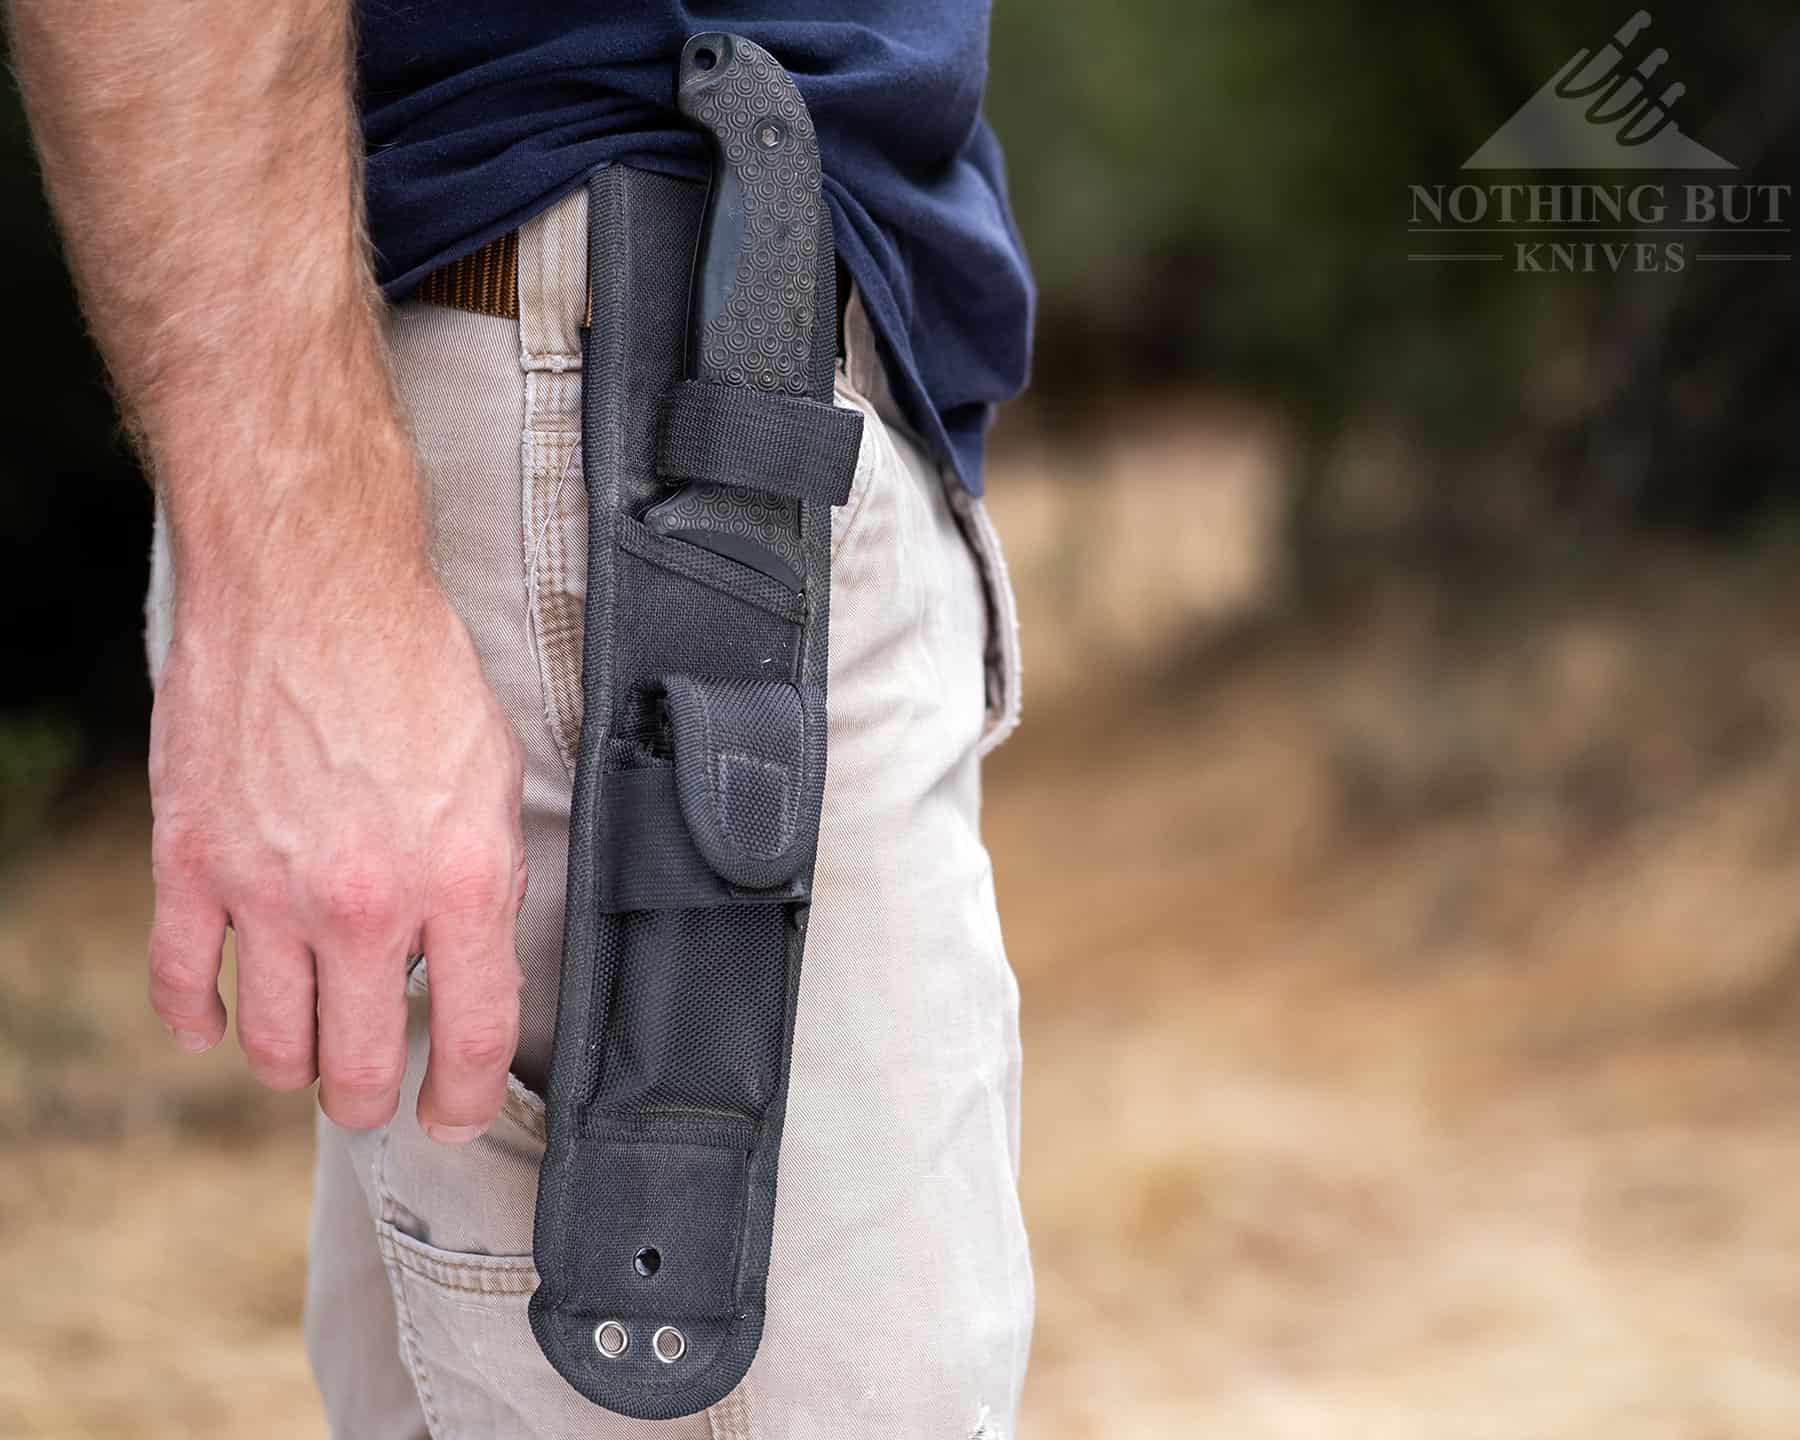 The nylon sheath that ships with the Frontier is neither durable nor user friendly. 